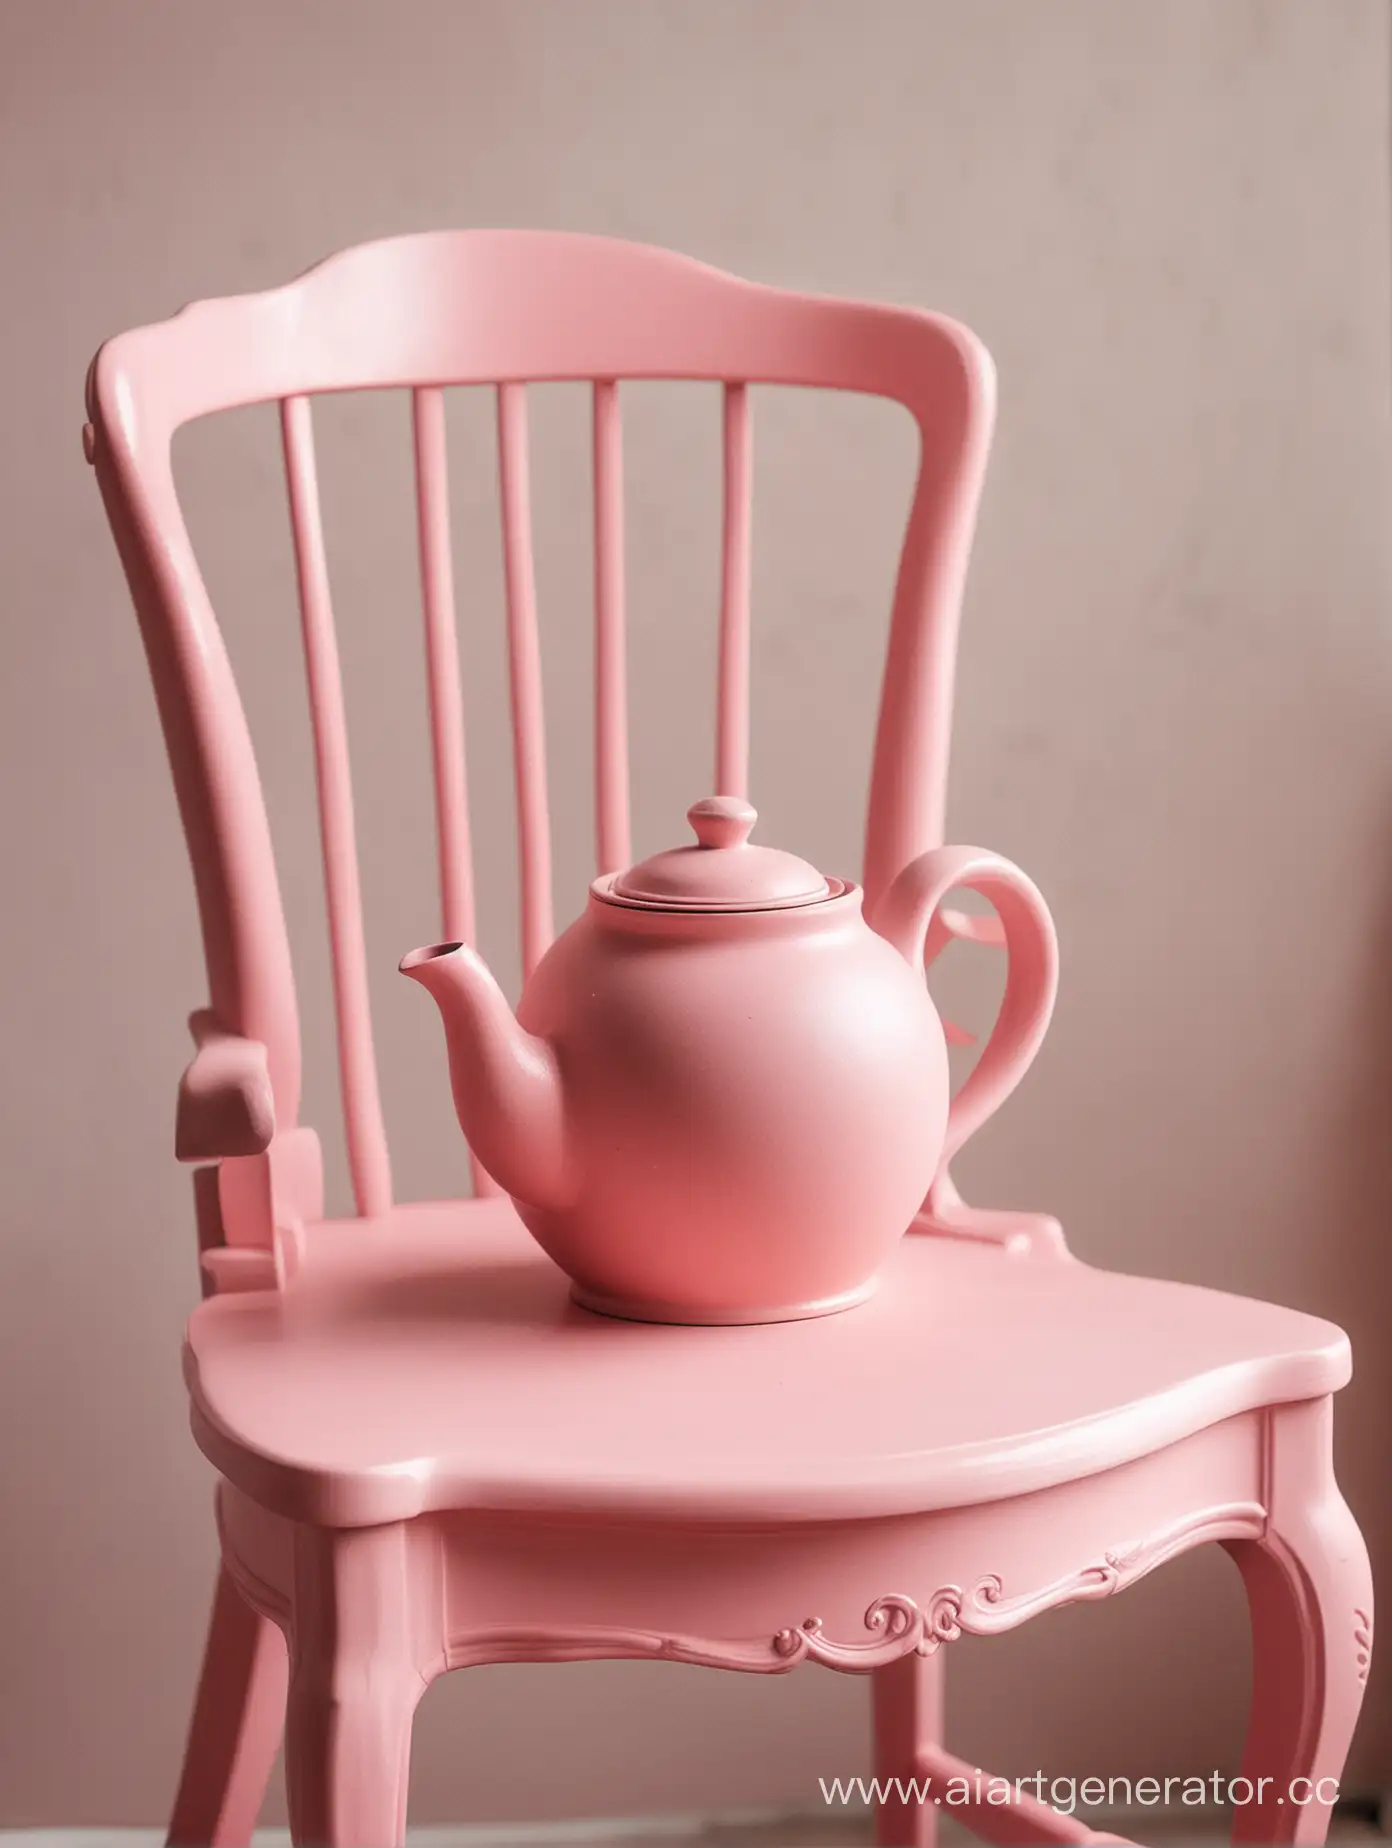 Rustic-Wooden-Teapot-Adorning-a-Cozy-Pink-Chair